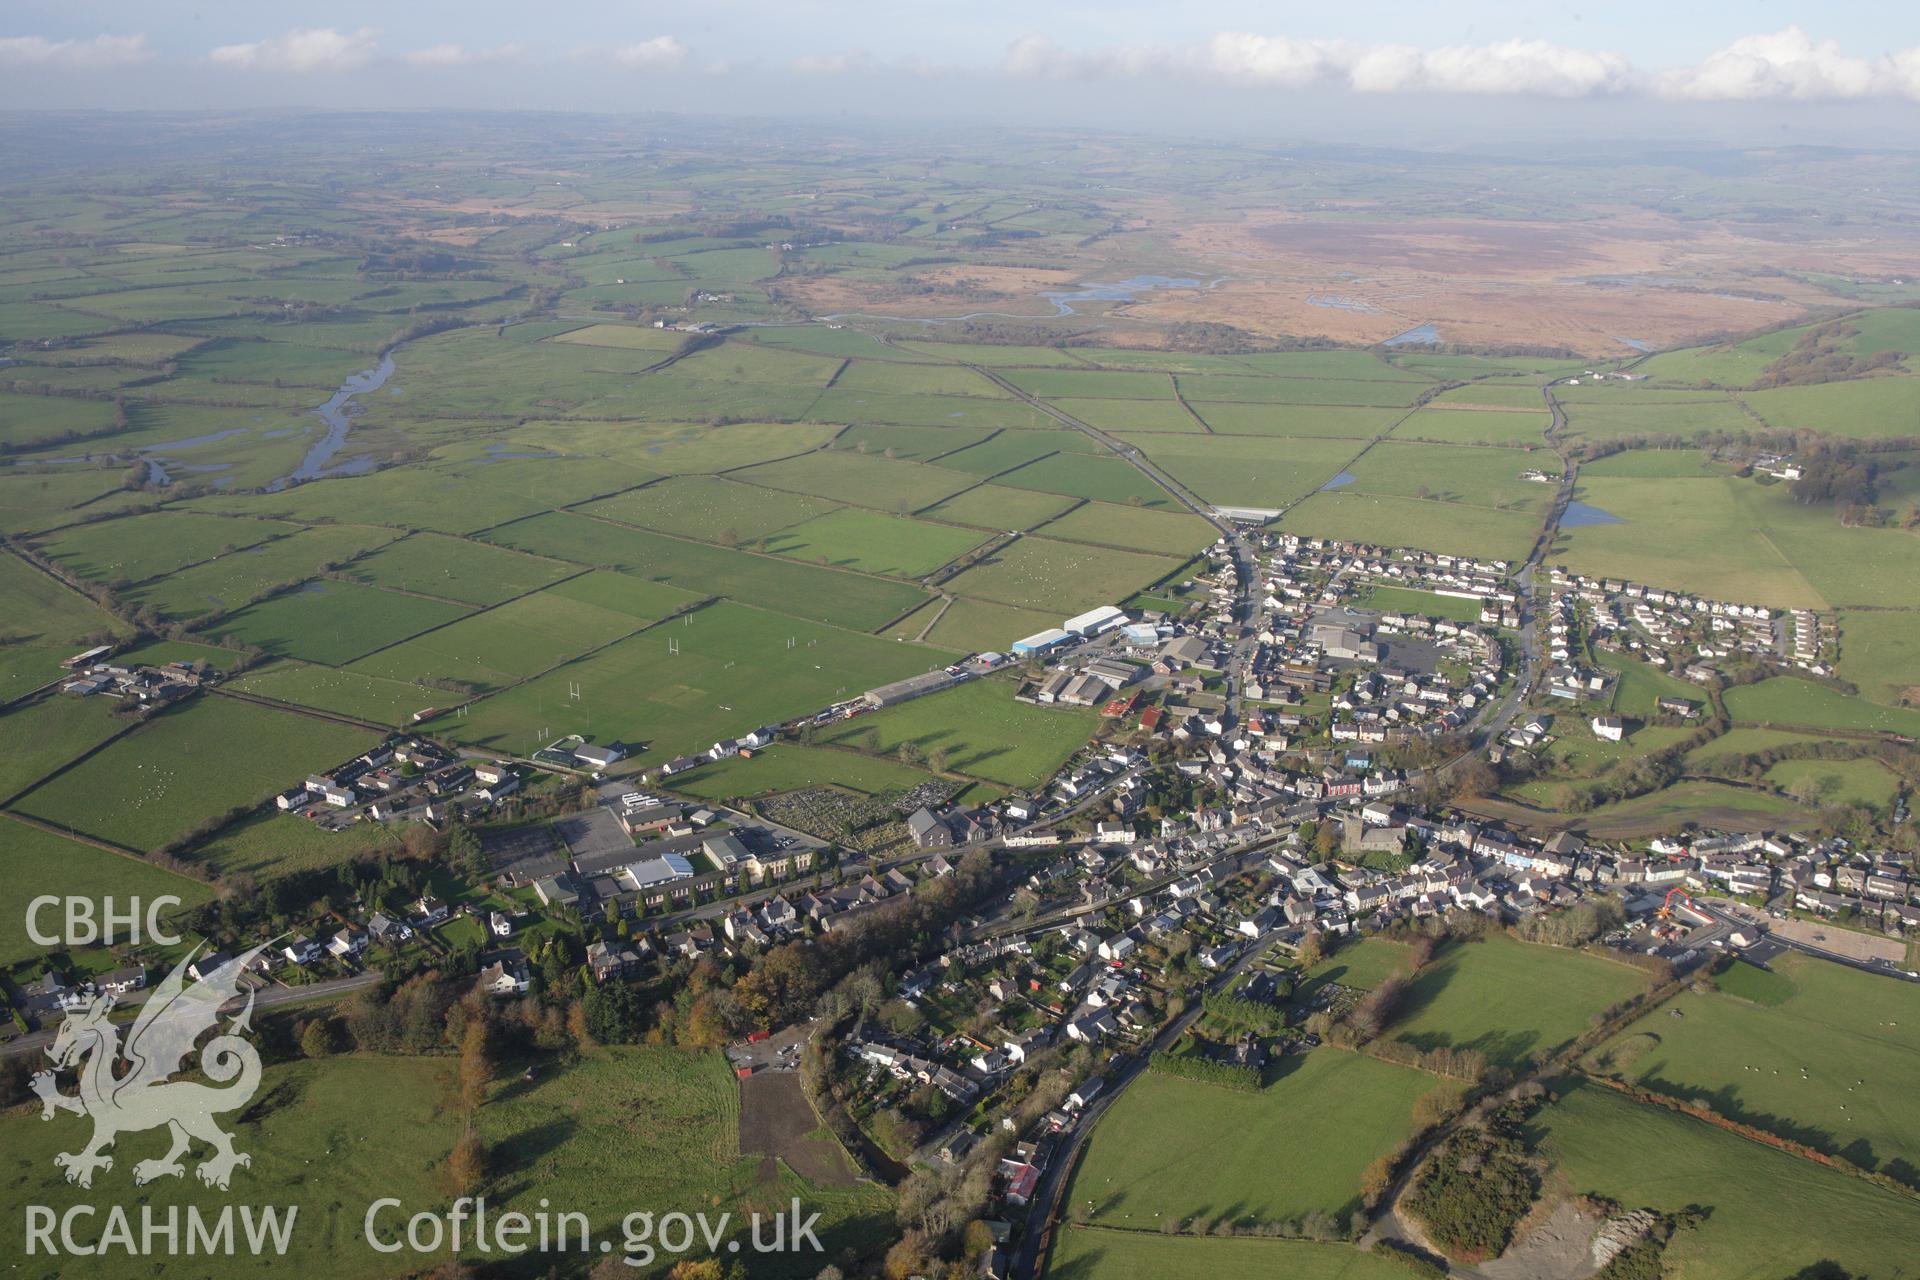 RCAHMW colour oblique aerial photograph of Tregaron from the south. Taken on 09 November 2009 by Toby Driver